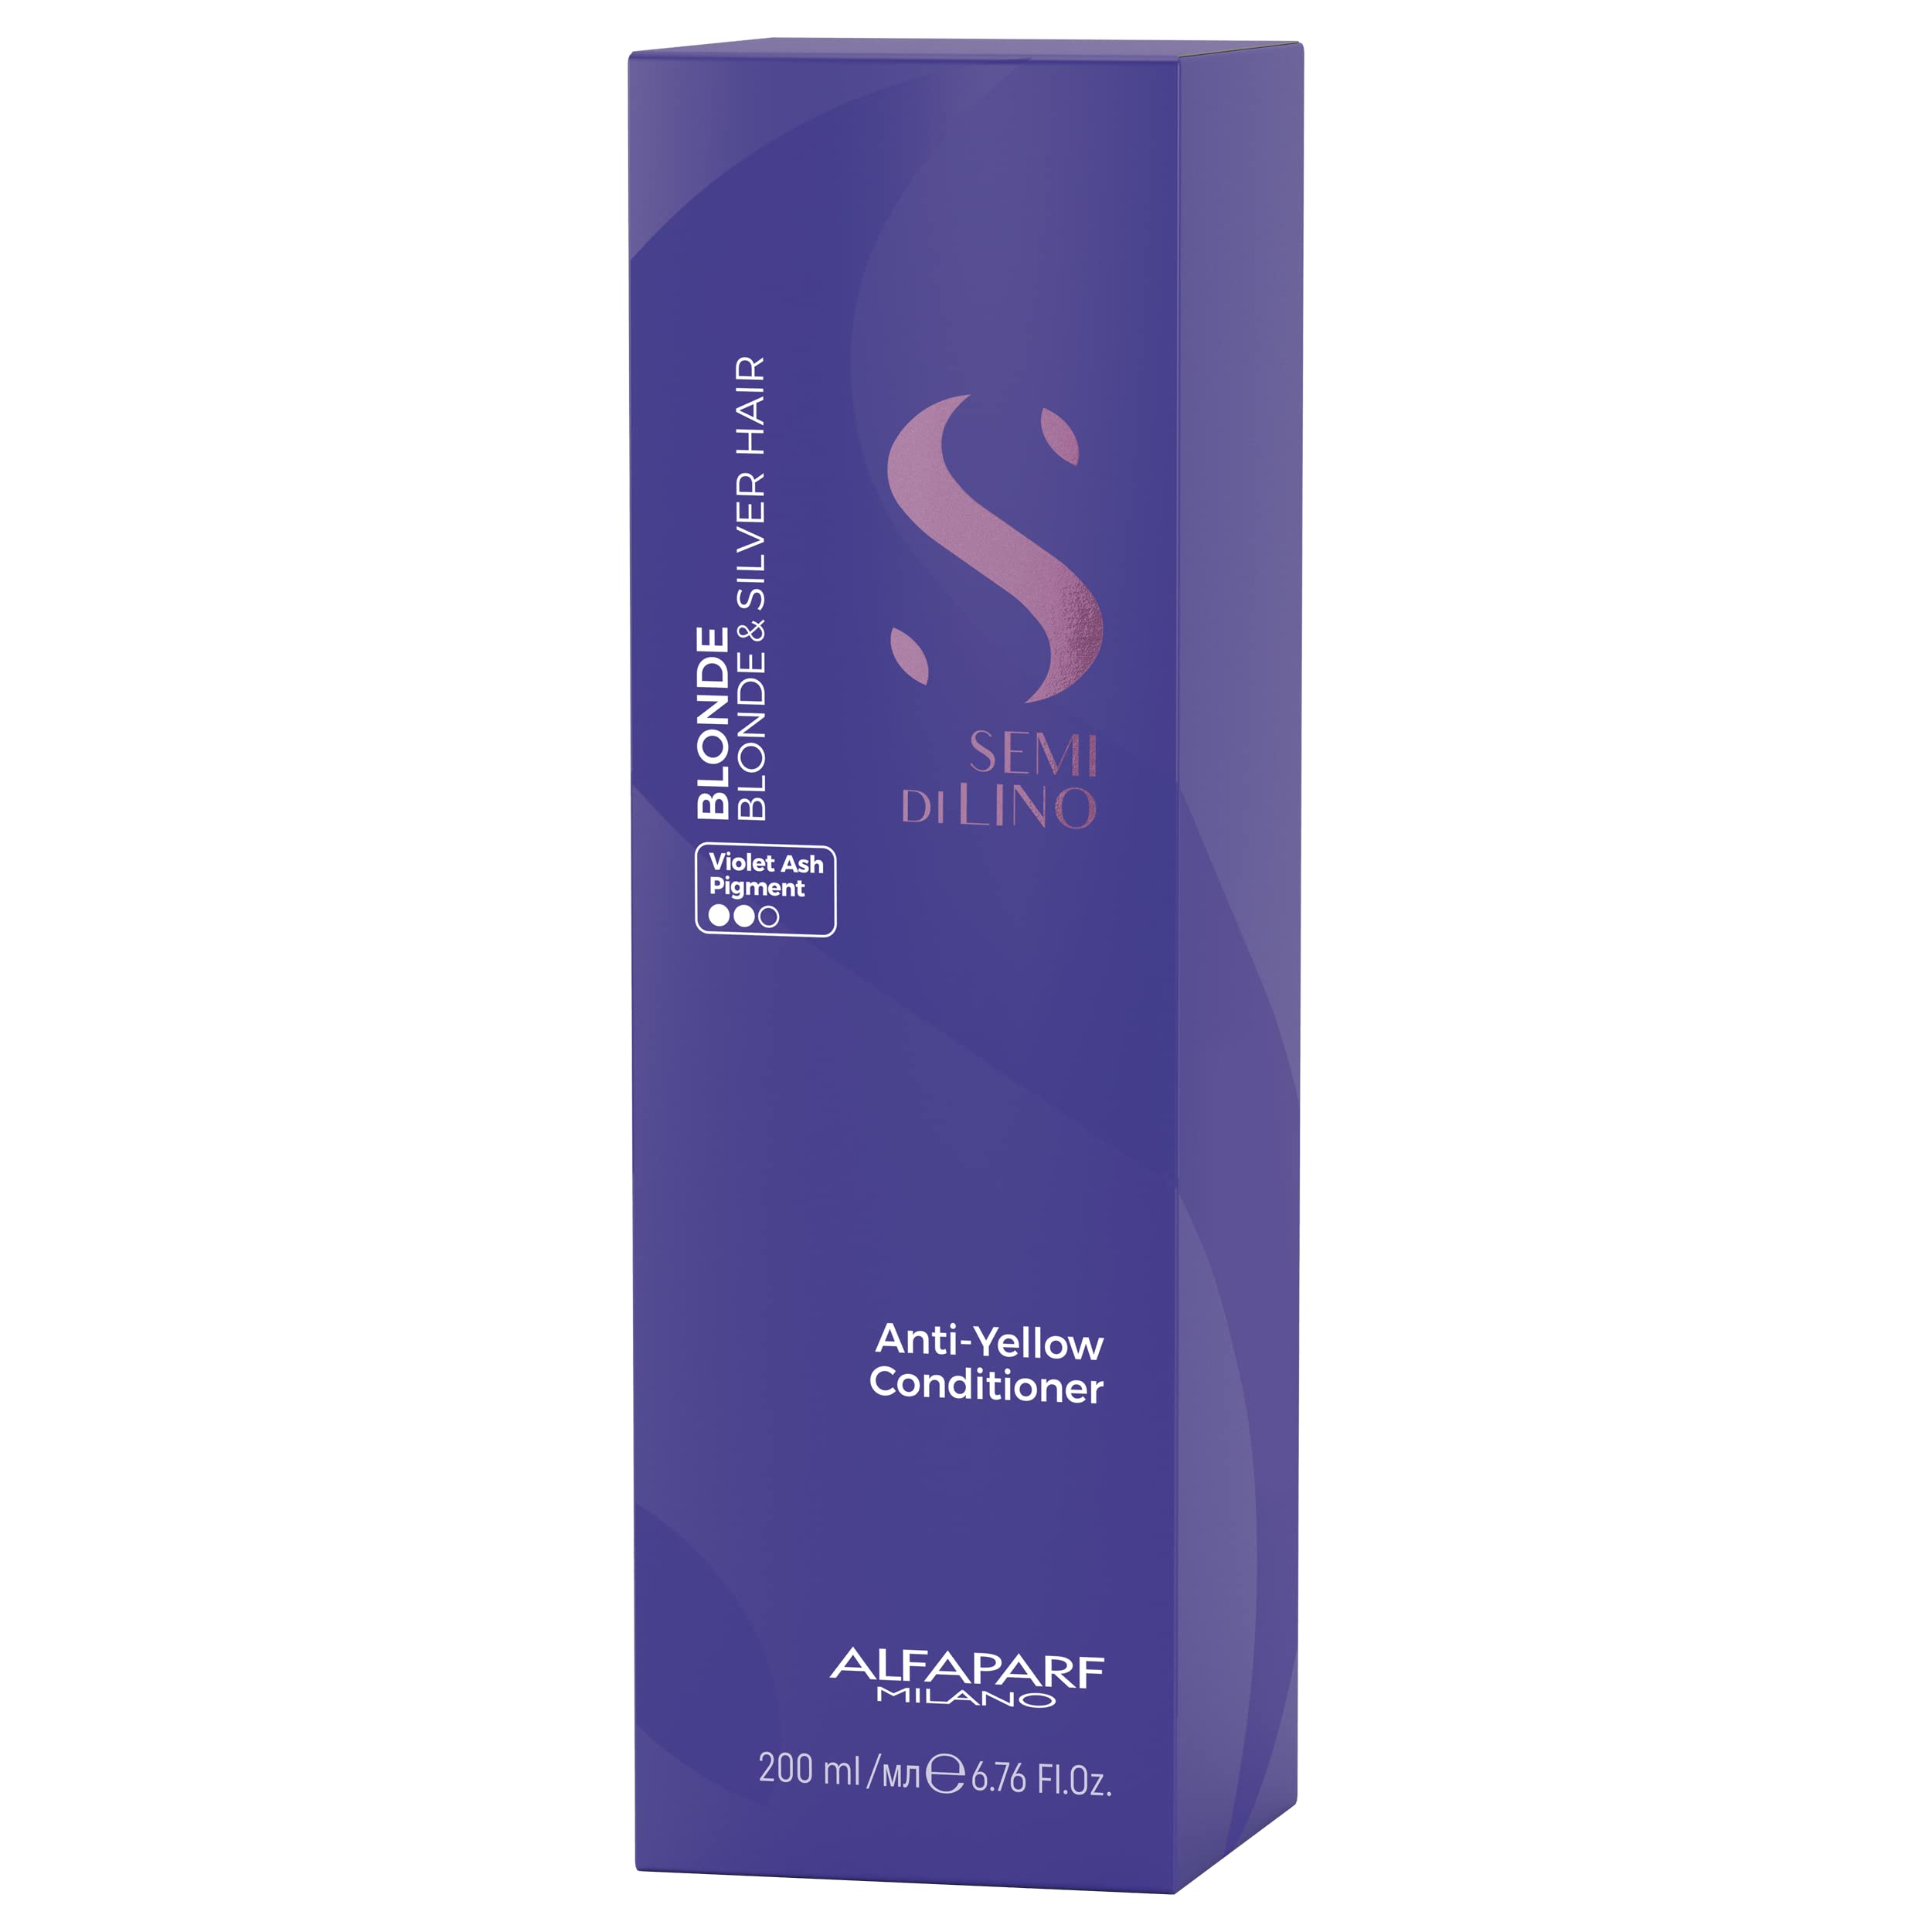 Alfaparf Milano Semi di Lino Blonde Anti-Yellow Conditioner for Blonde, Platinum and Silver Hair - Paraffin Free Purple Conditioner - Removes Yellow and Brassy Tones - Corrects Brassiness